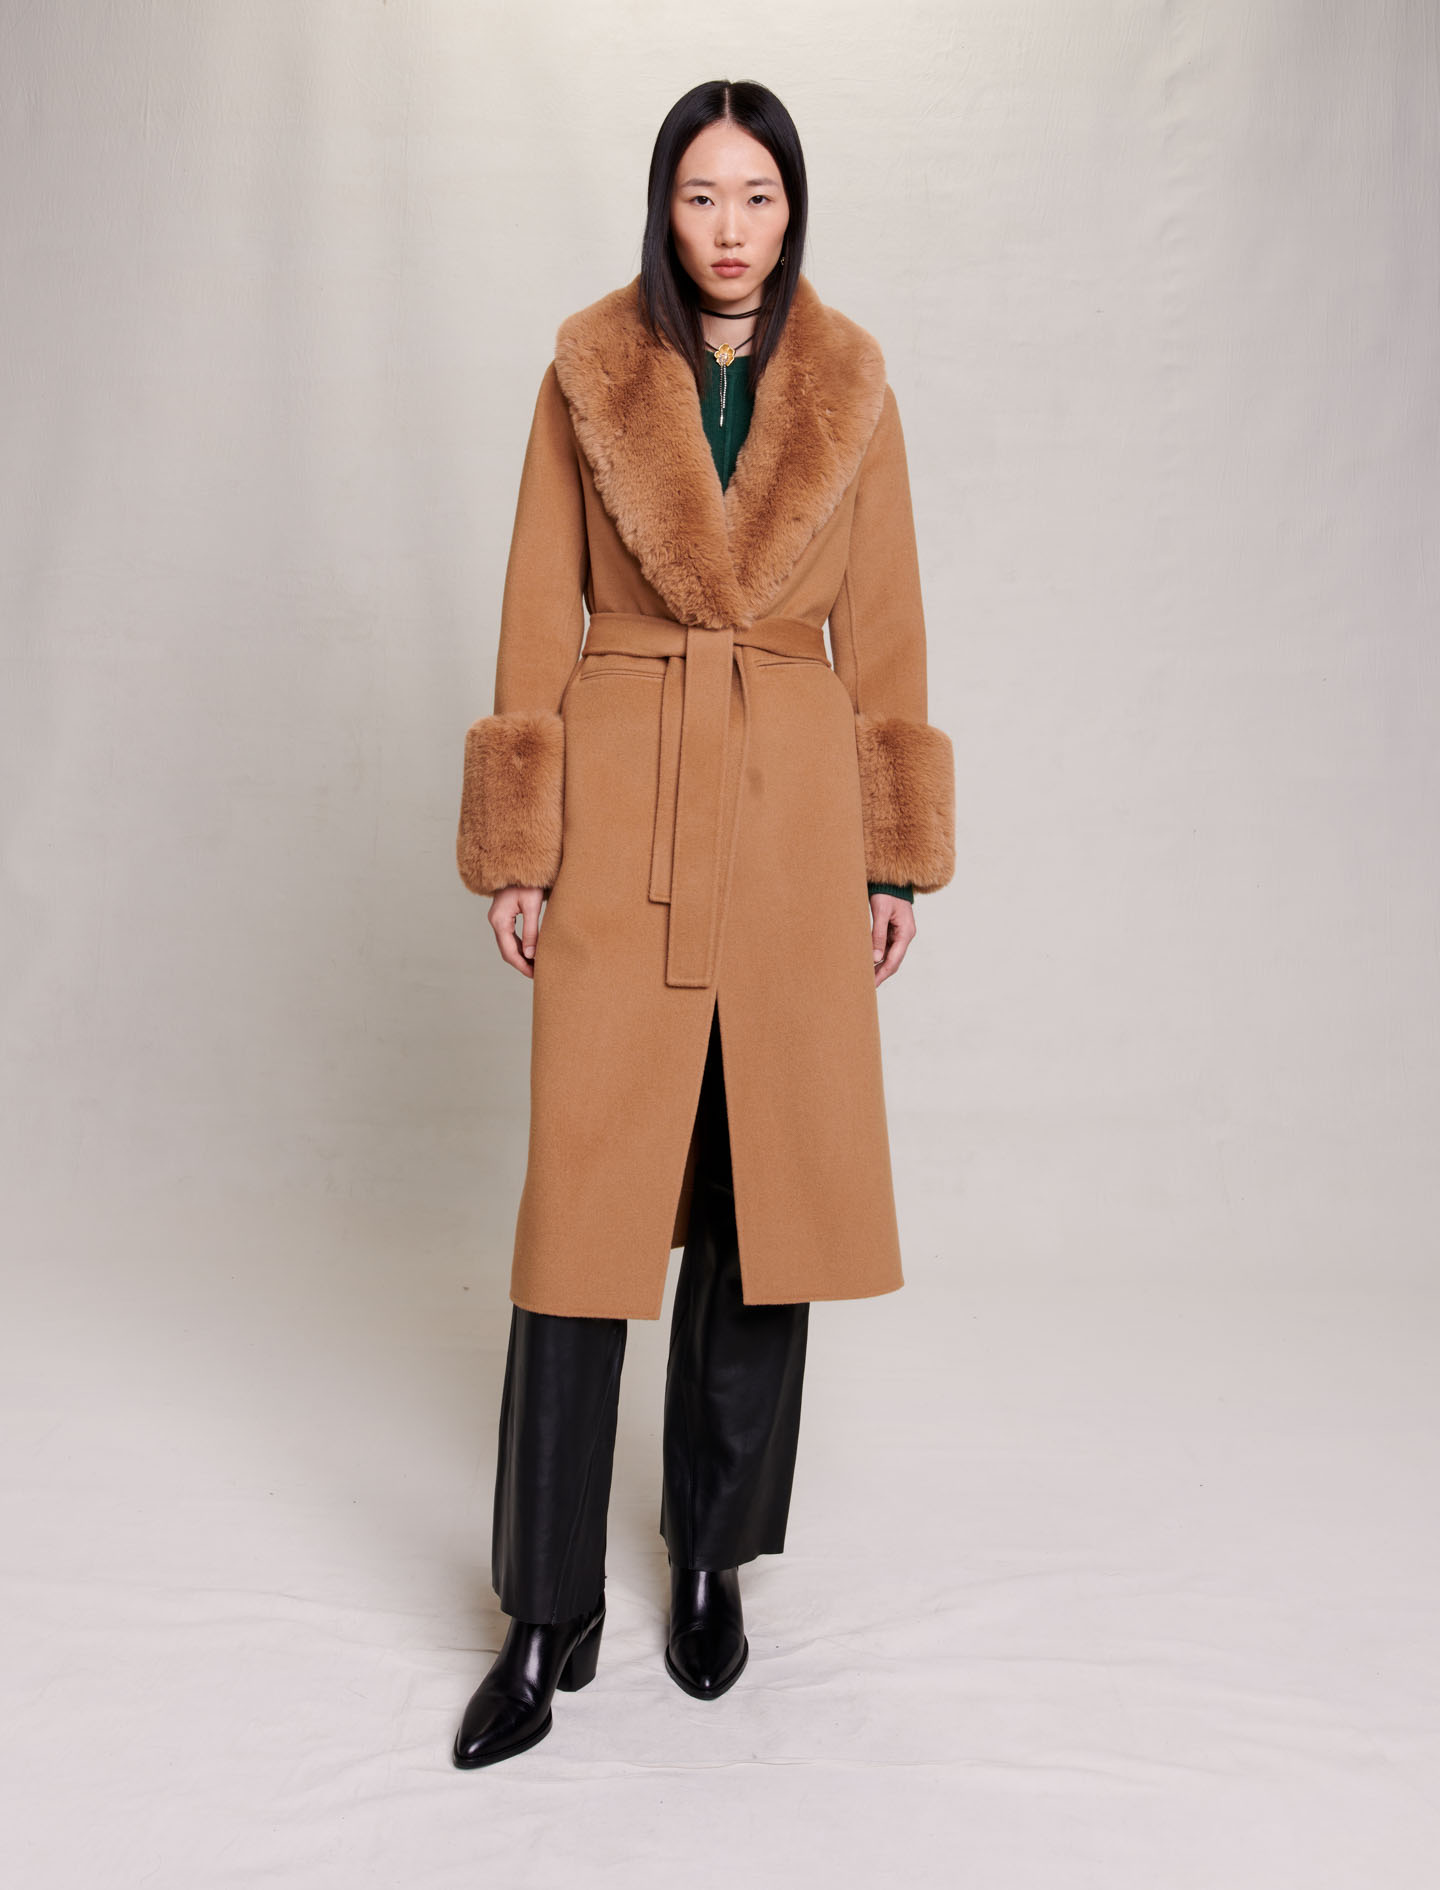 Maje Woman's wool, Long wool coat for Fall/Winter, in color Camel / Brown